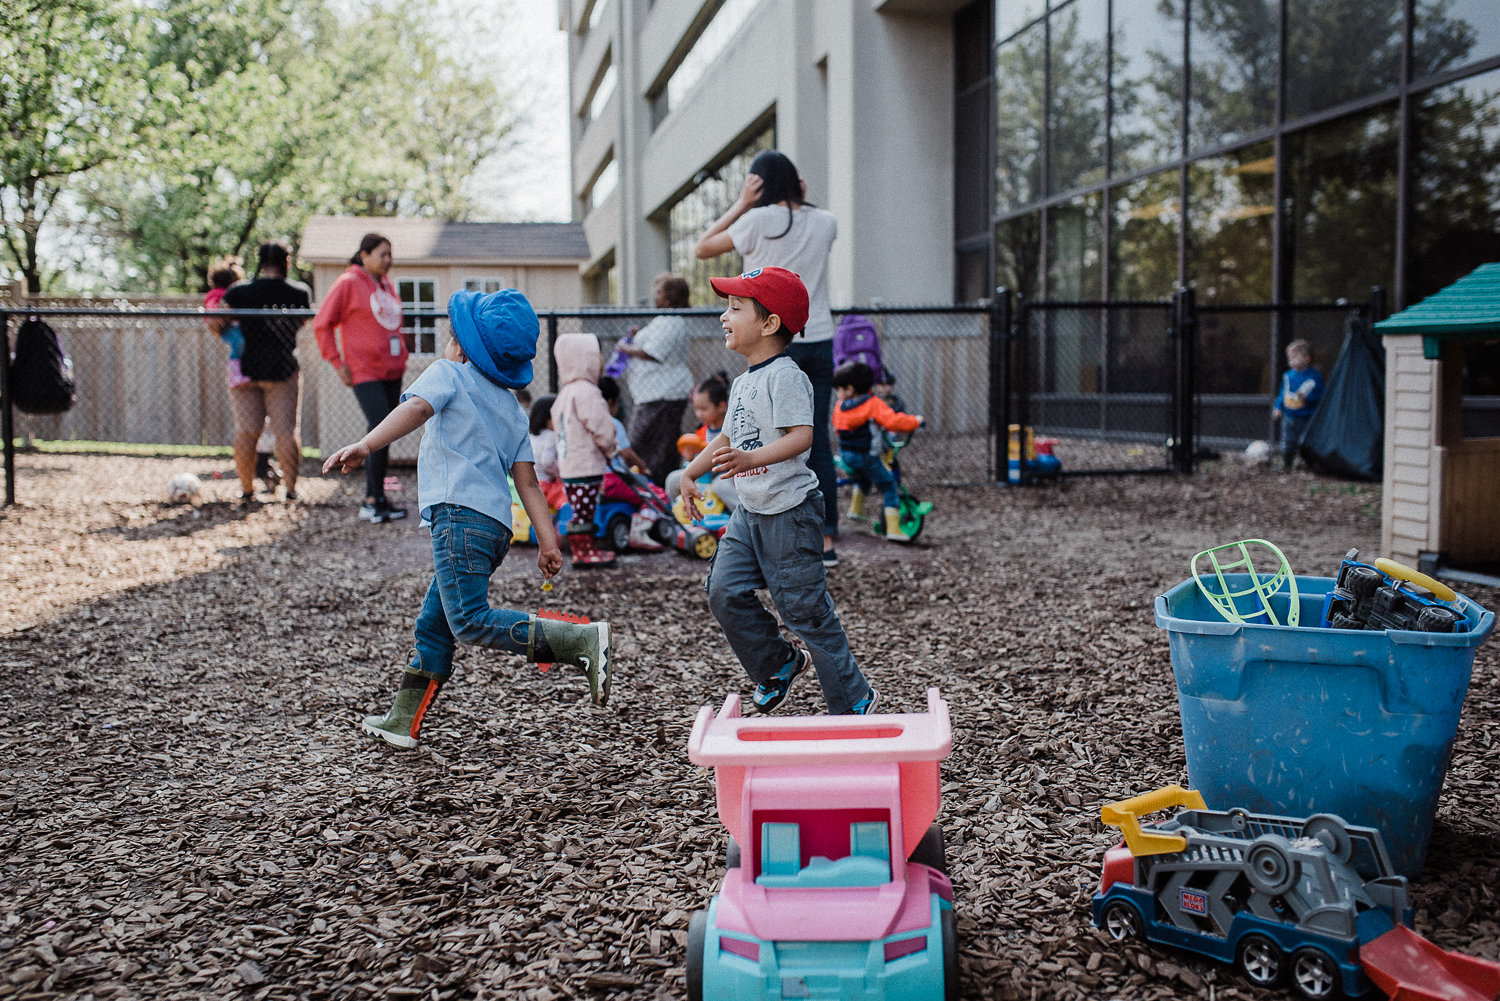 Children are running in the daycare backyard